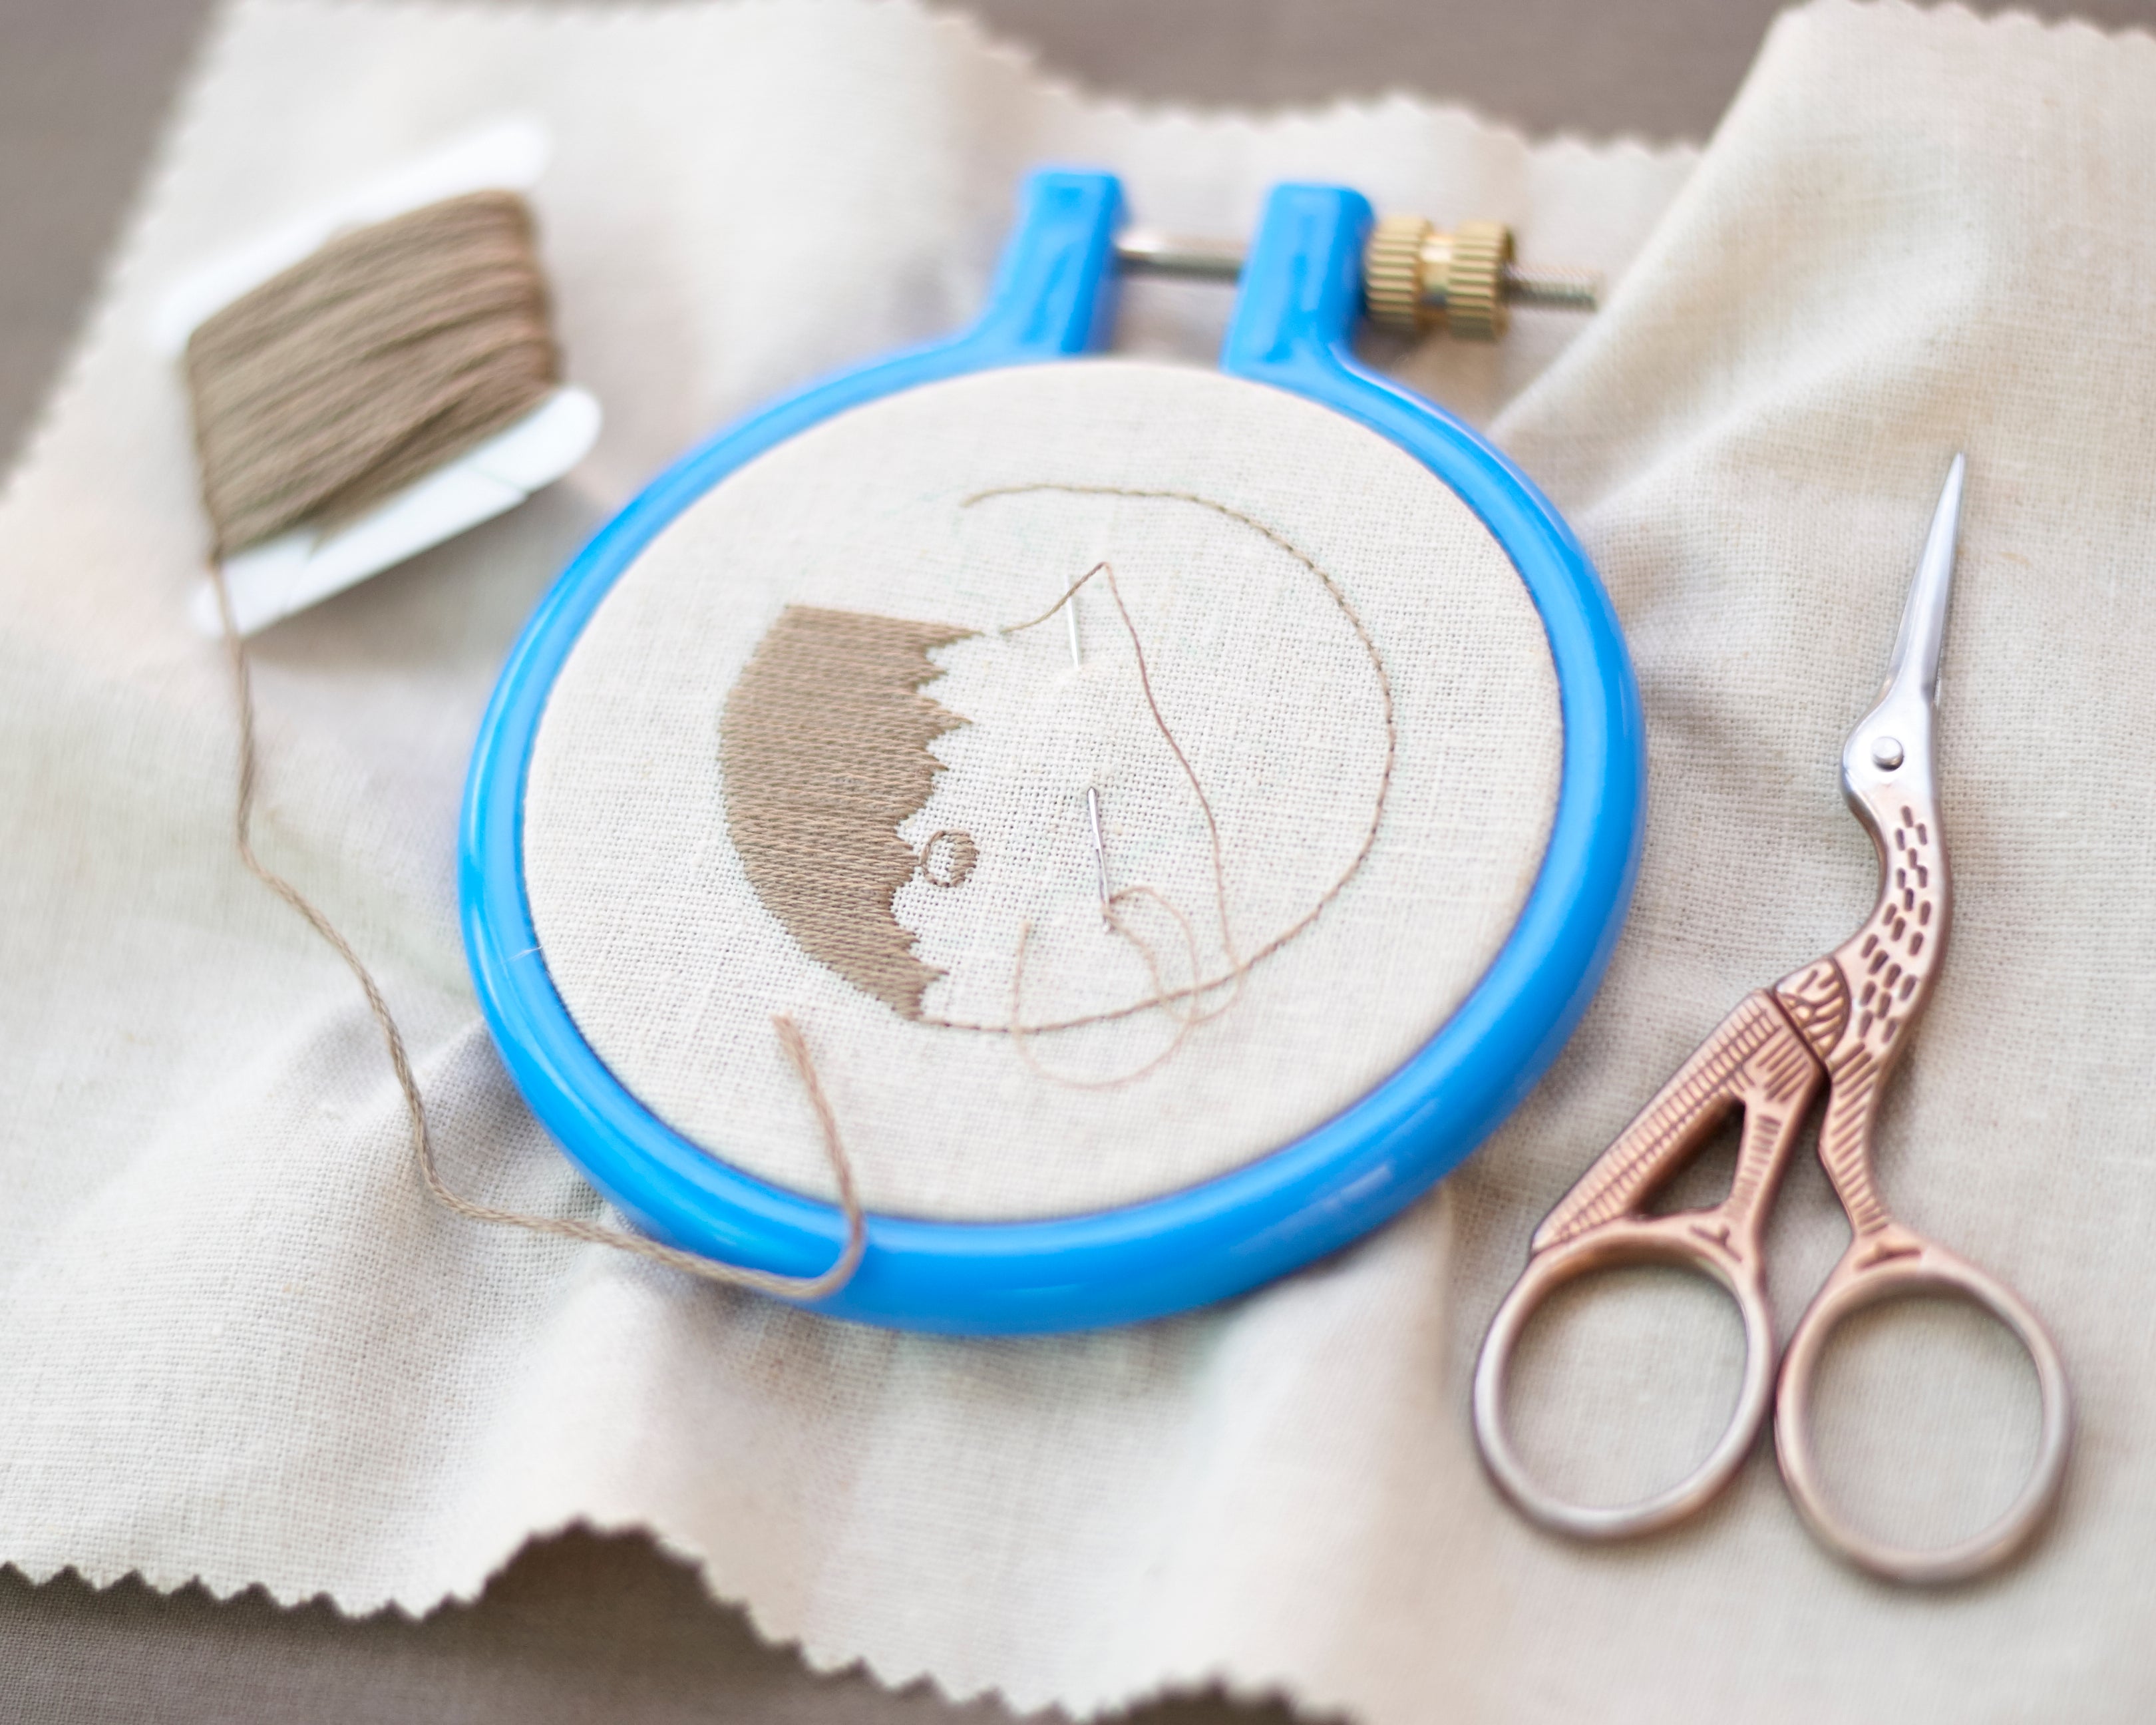 Getting started with you Dandelyne mini embroidery hoop